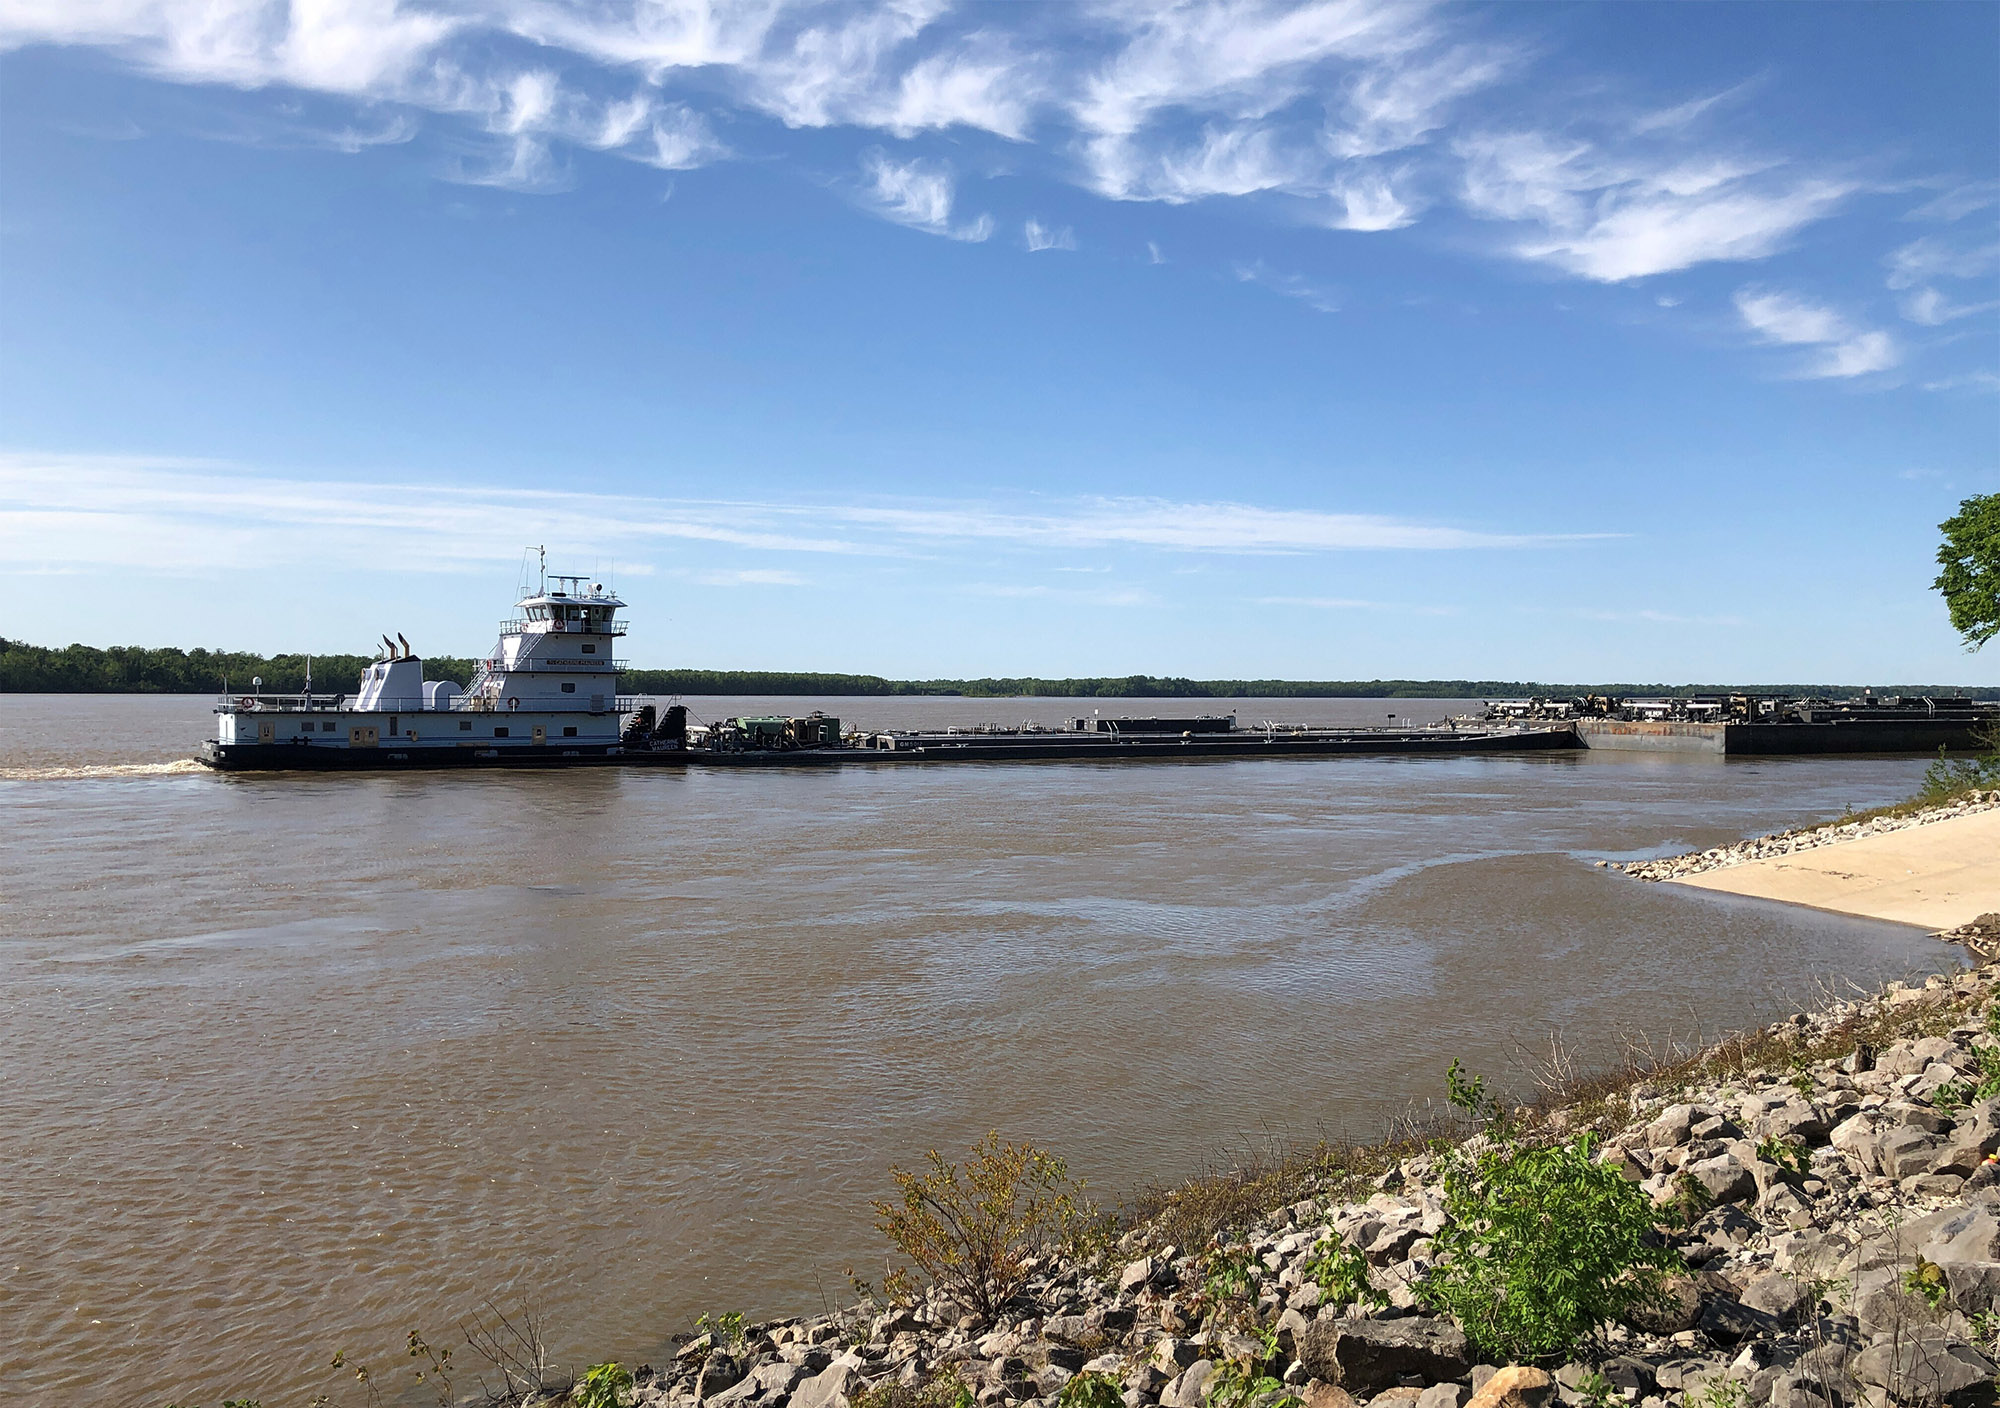 Over 700 Barges Stuck in Mississippi River From Bridge Crack Bloomberg